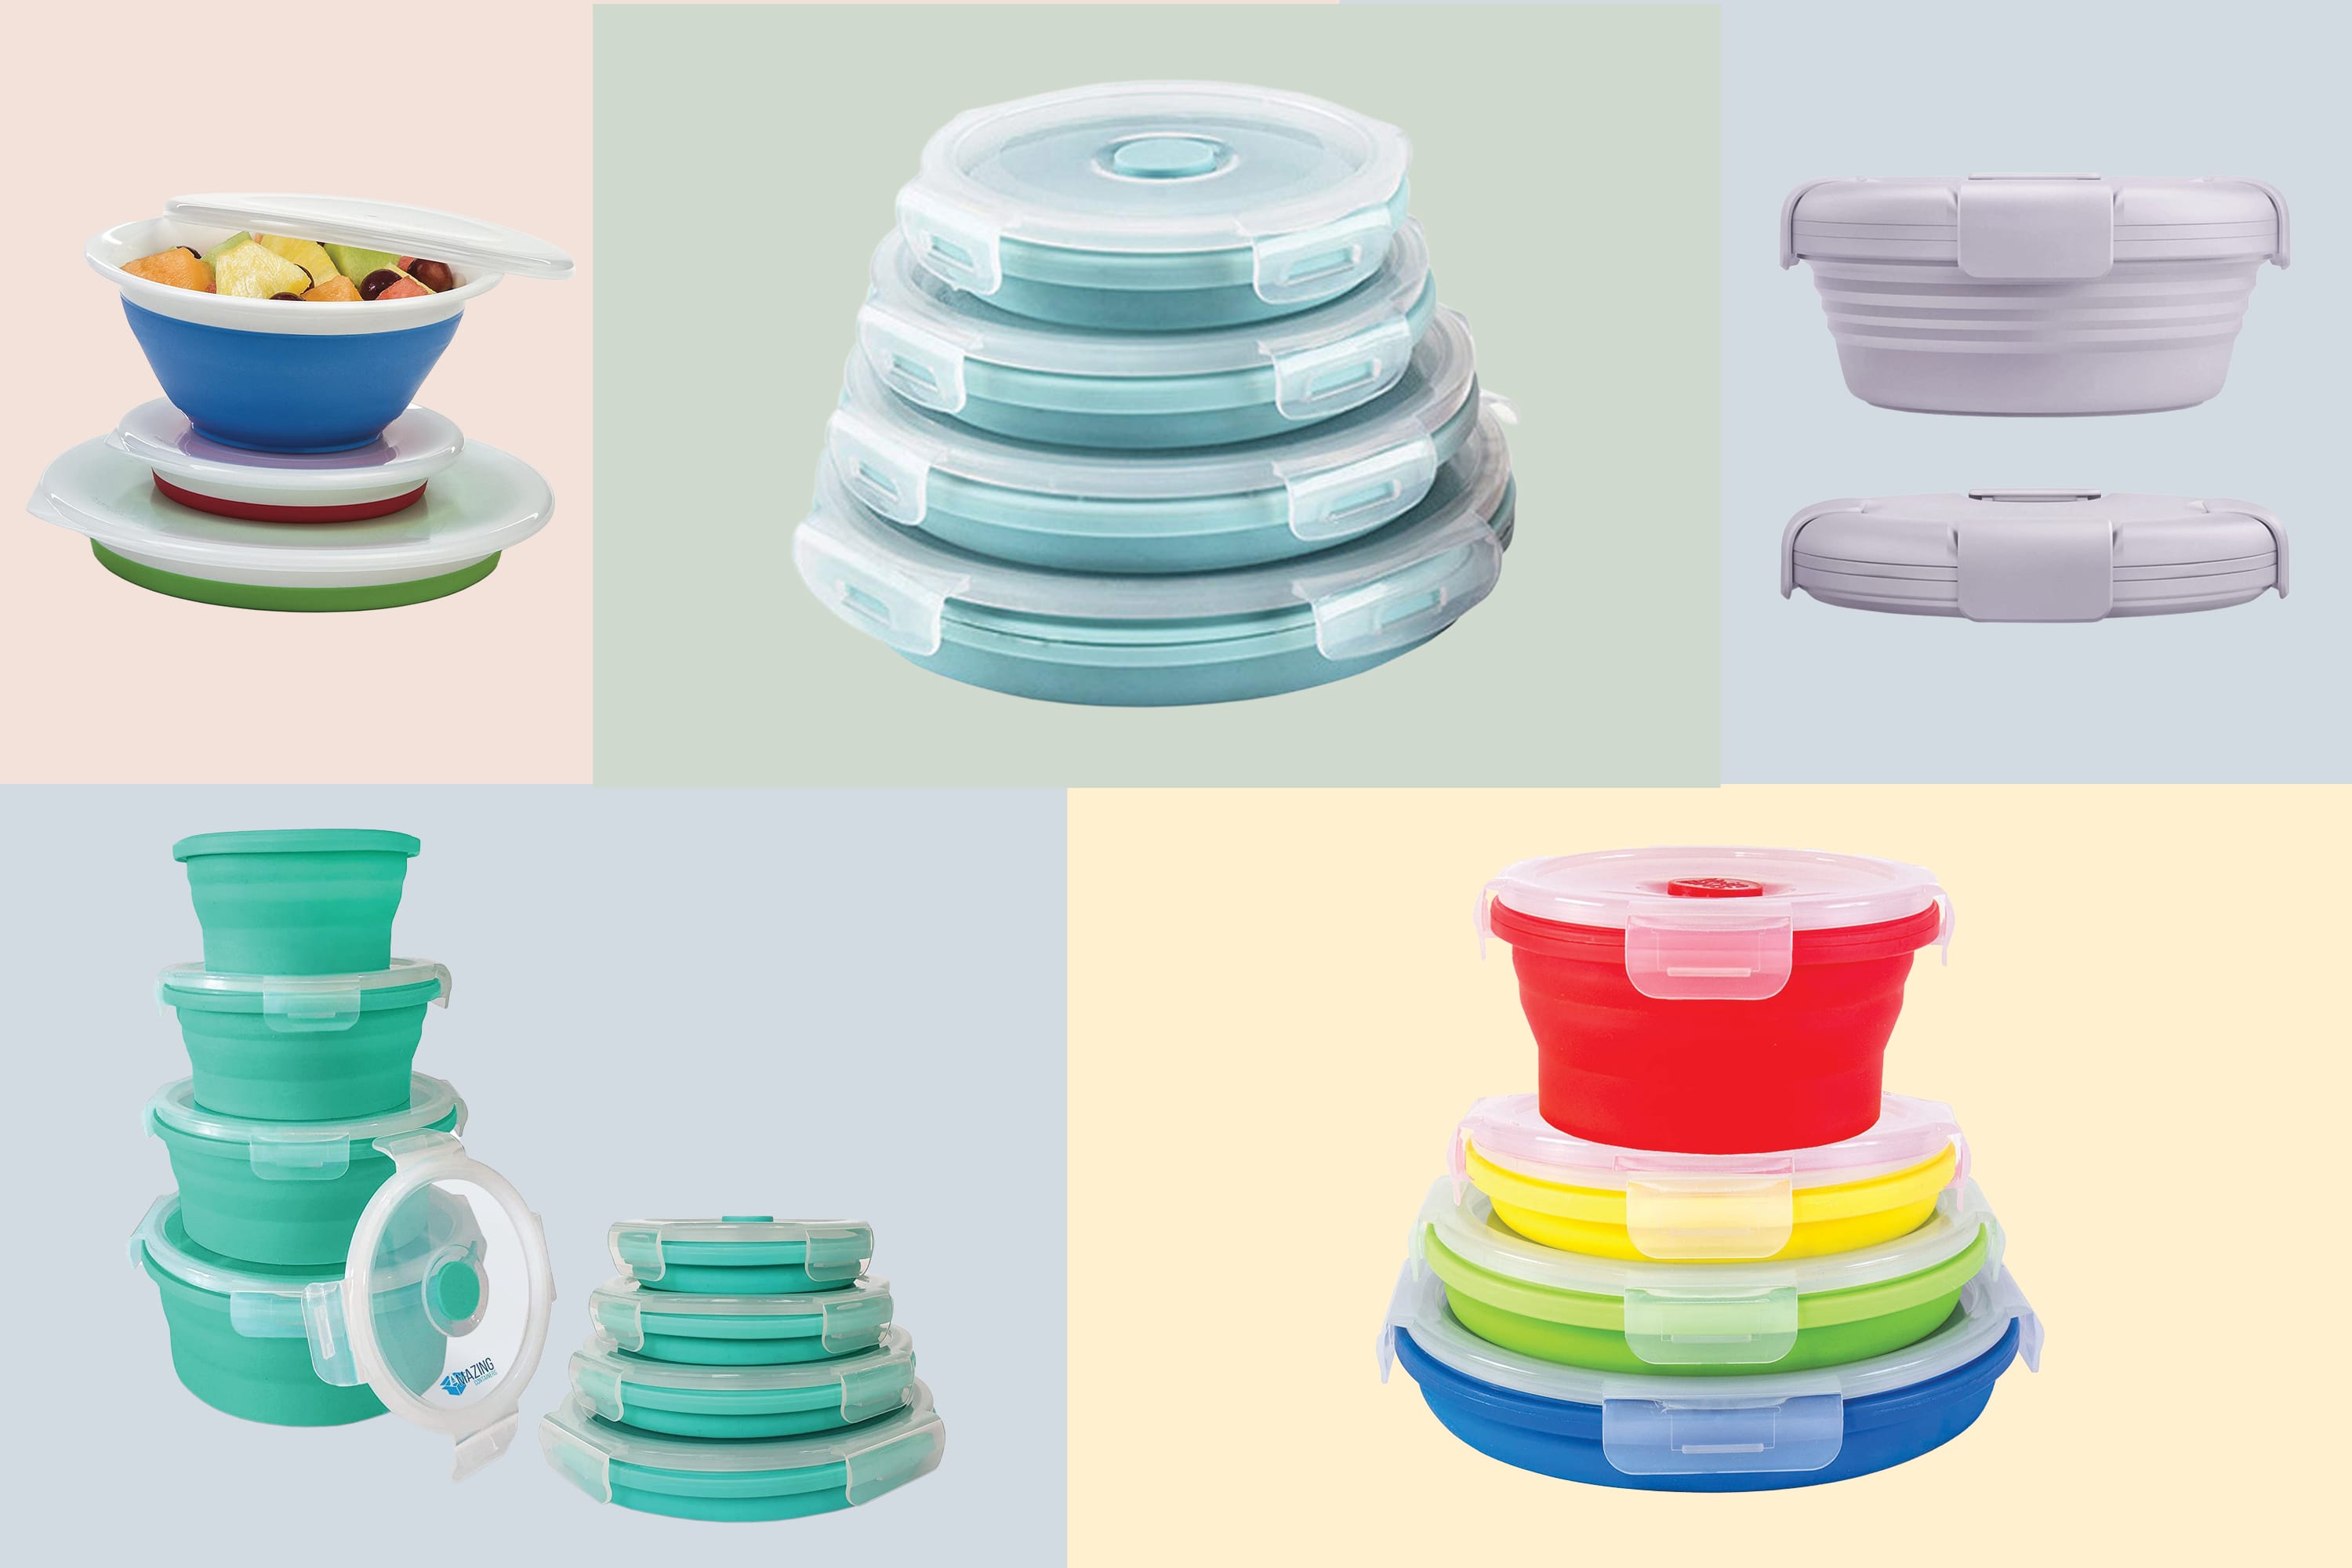 https://cdn.apartmenttherapy.info/image/upload/v1671727083/k/Design/2022-12/collapsible-containers-horizontal.jpg